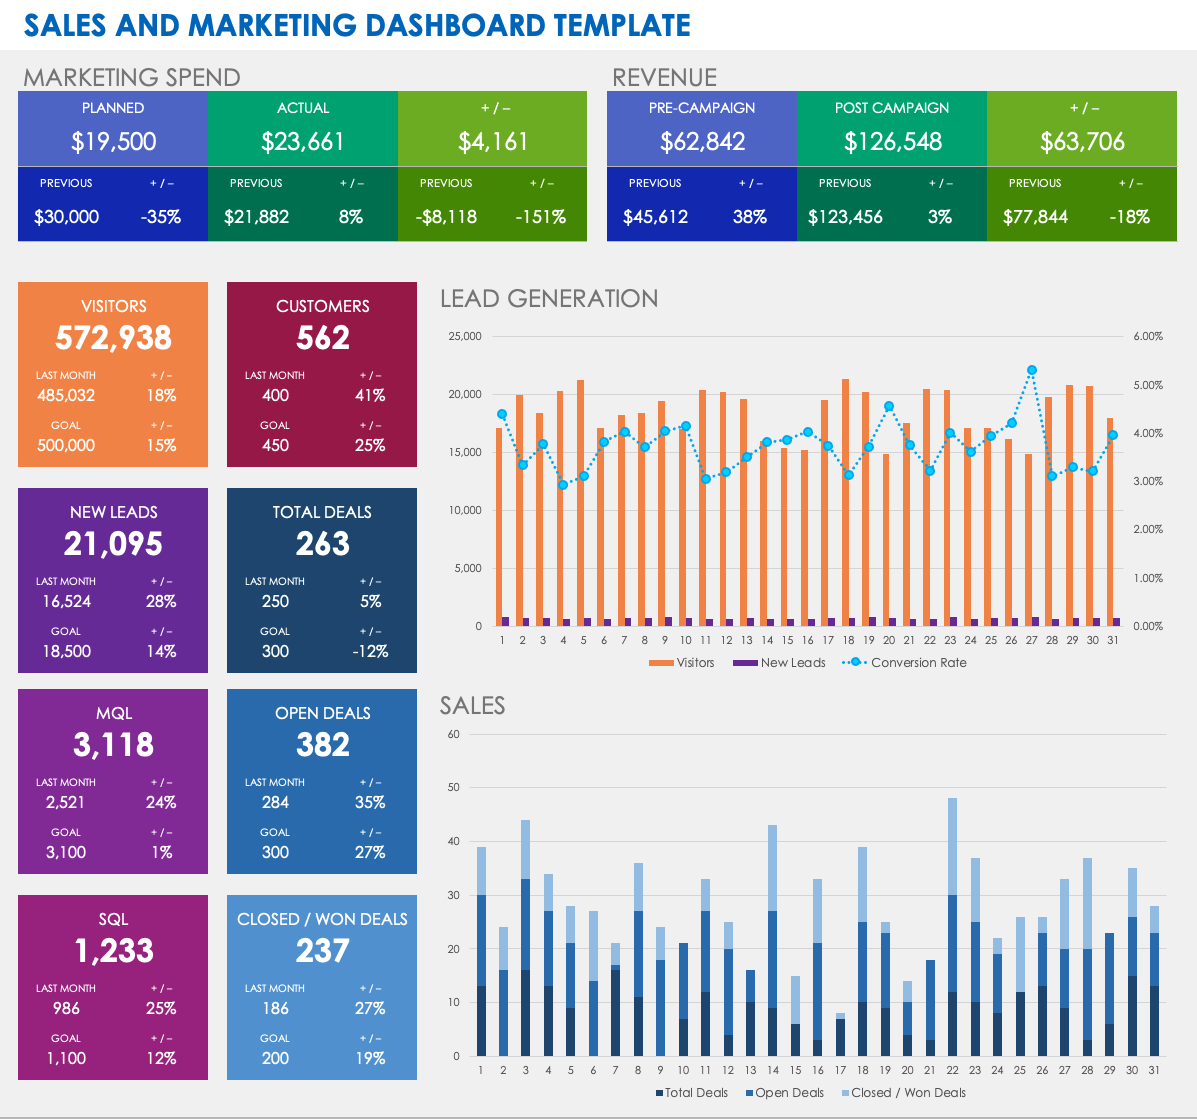 Sales and Marketing Dashboard Template